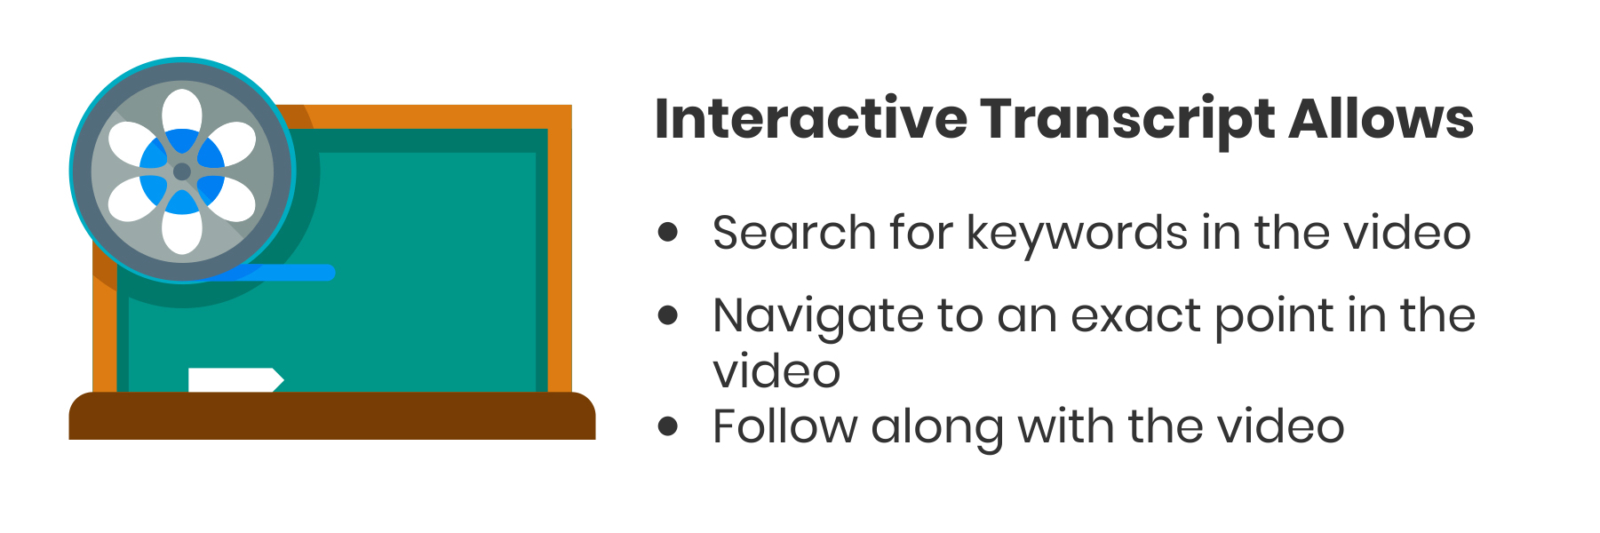 Interactive Transcript Allows: Search for keywords in the video. Navigate to an exact point in the video. Follow along with the video.